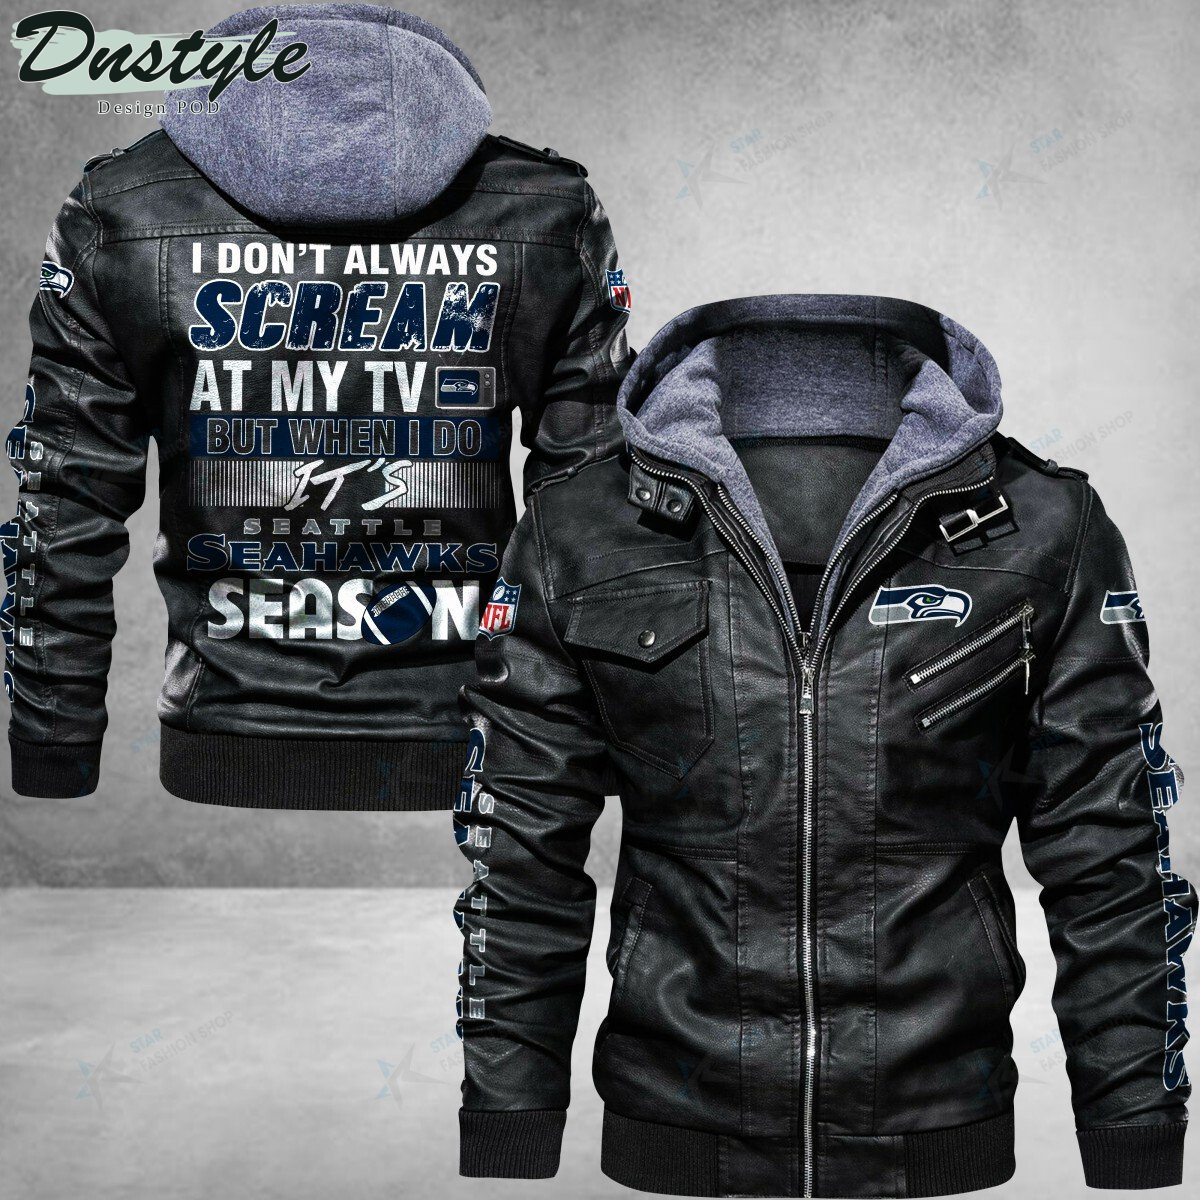 Seattle Seahawks I don't Always Scream At My TV Leather Jacket